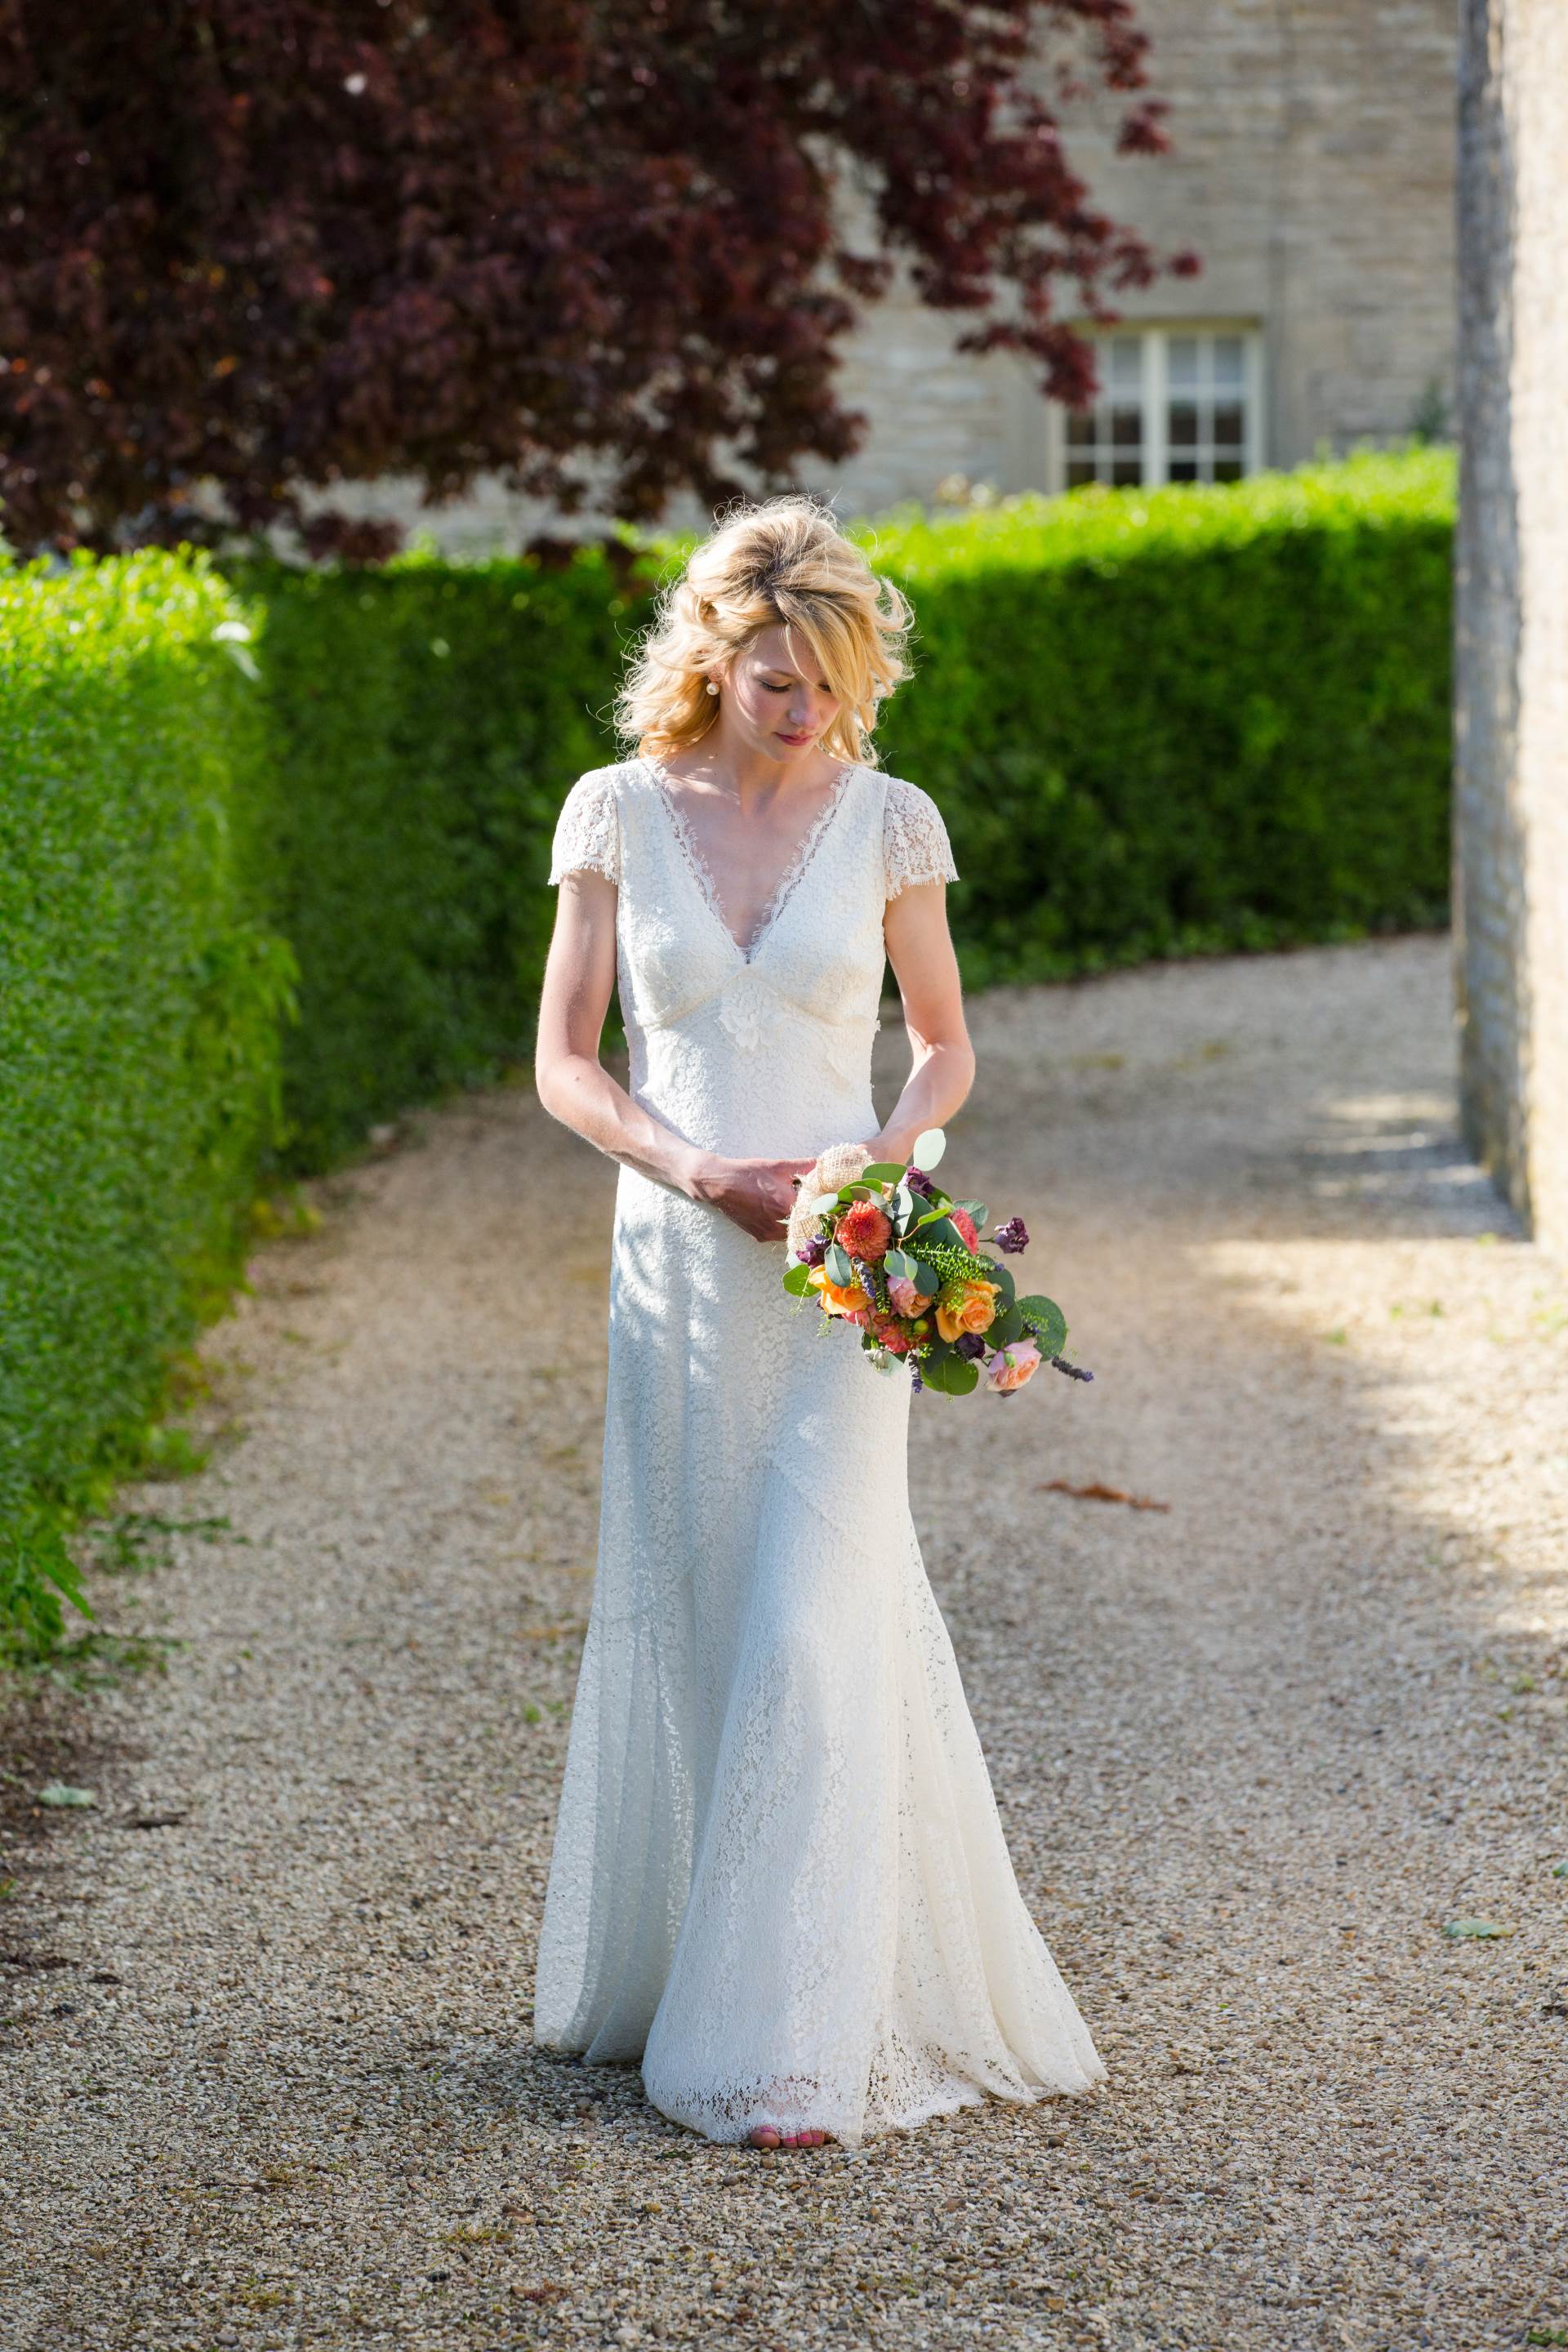 Elise by Sally Lacock as featured on the National Vintage Wedding Fair blog